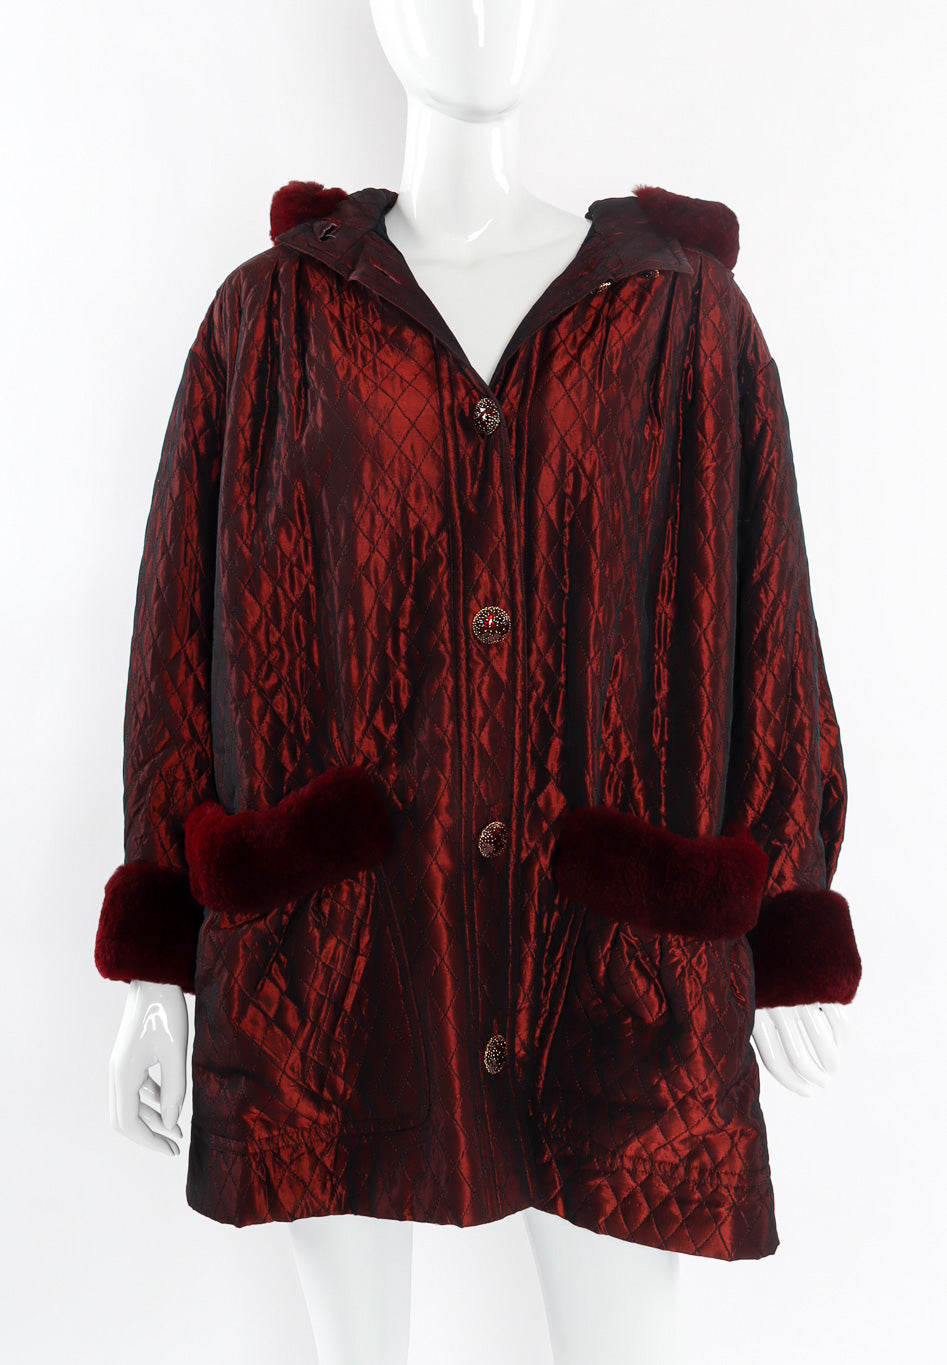 Effervescent quilted burgundy fur lined parka by Yves Saint Laurent front view photo @recessla